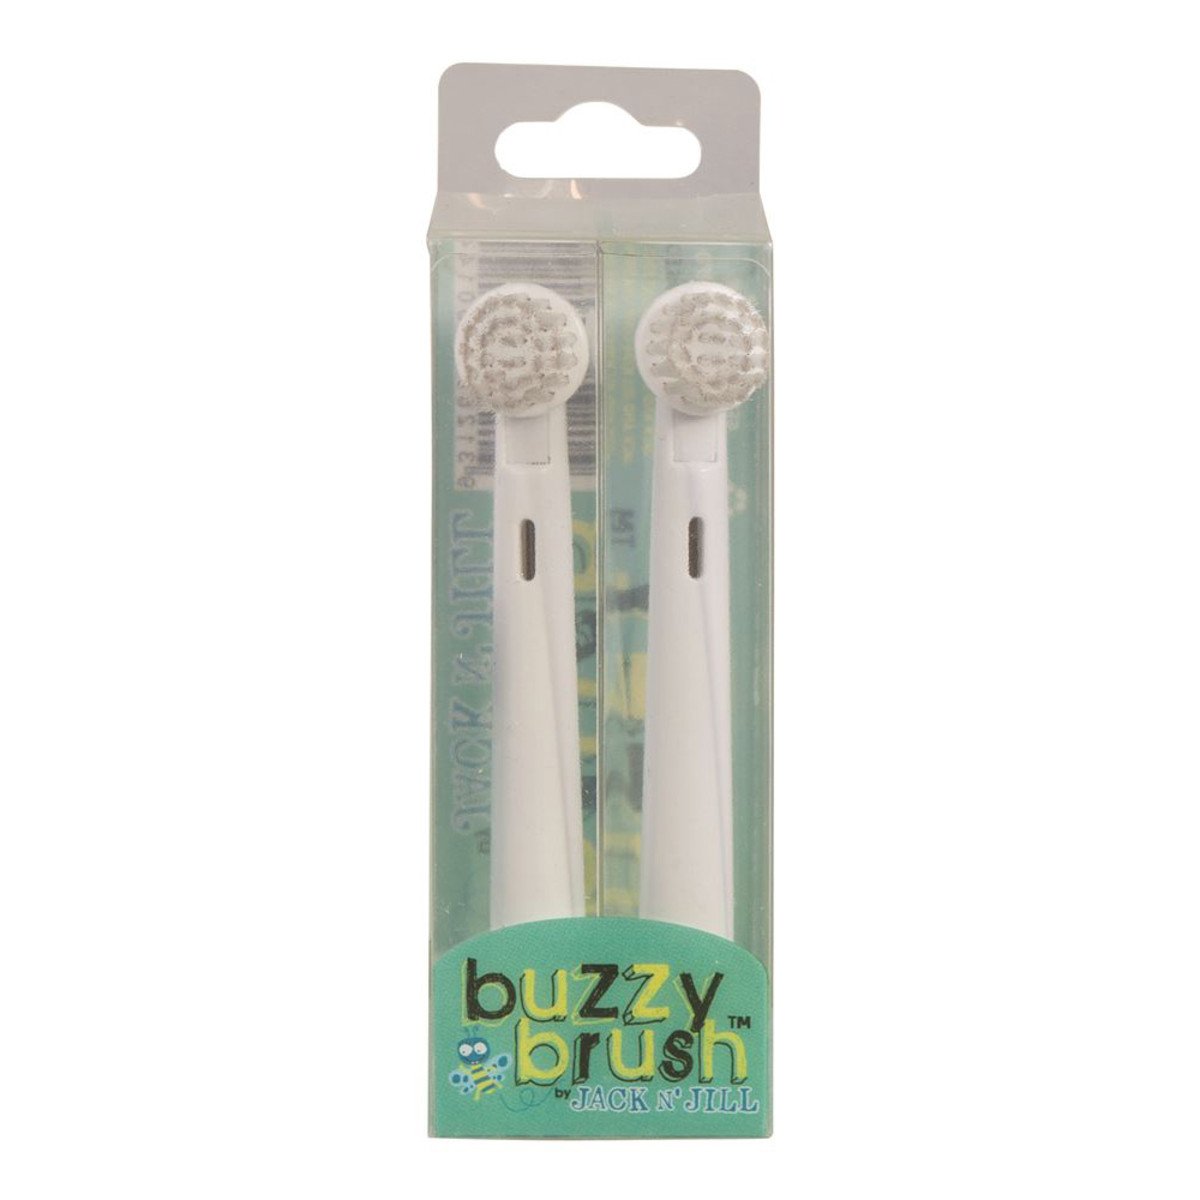 Jack N Jill Buzzy Brush Elec Toothbrush Replace Heads 2 pack - The Nappy Shop